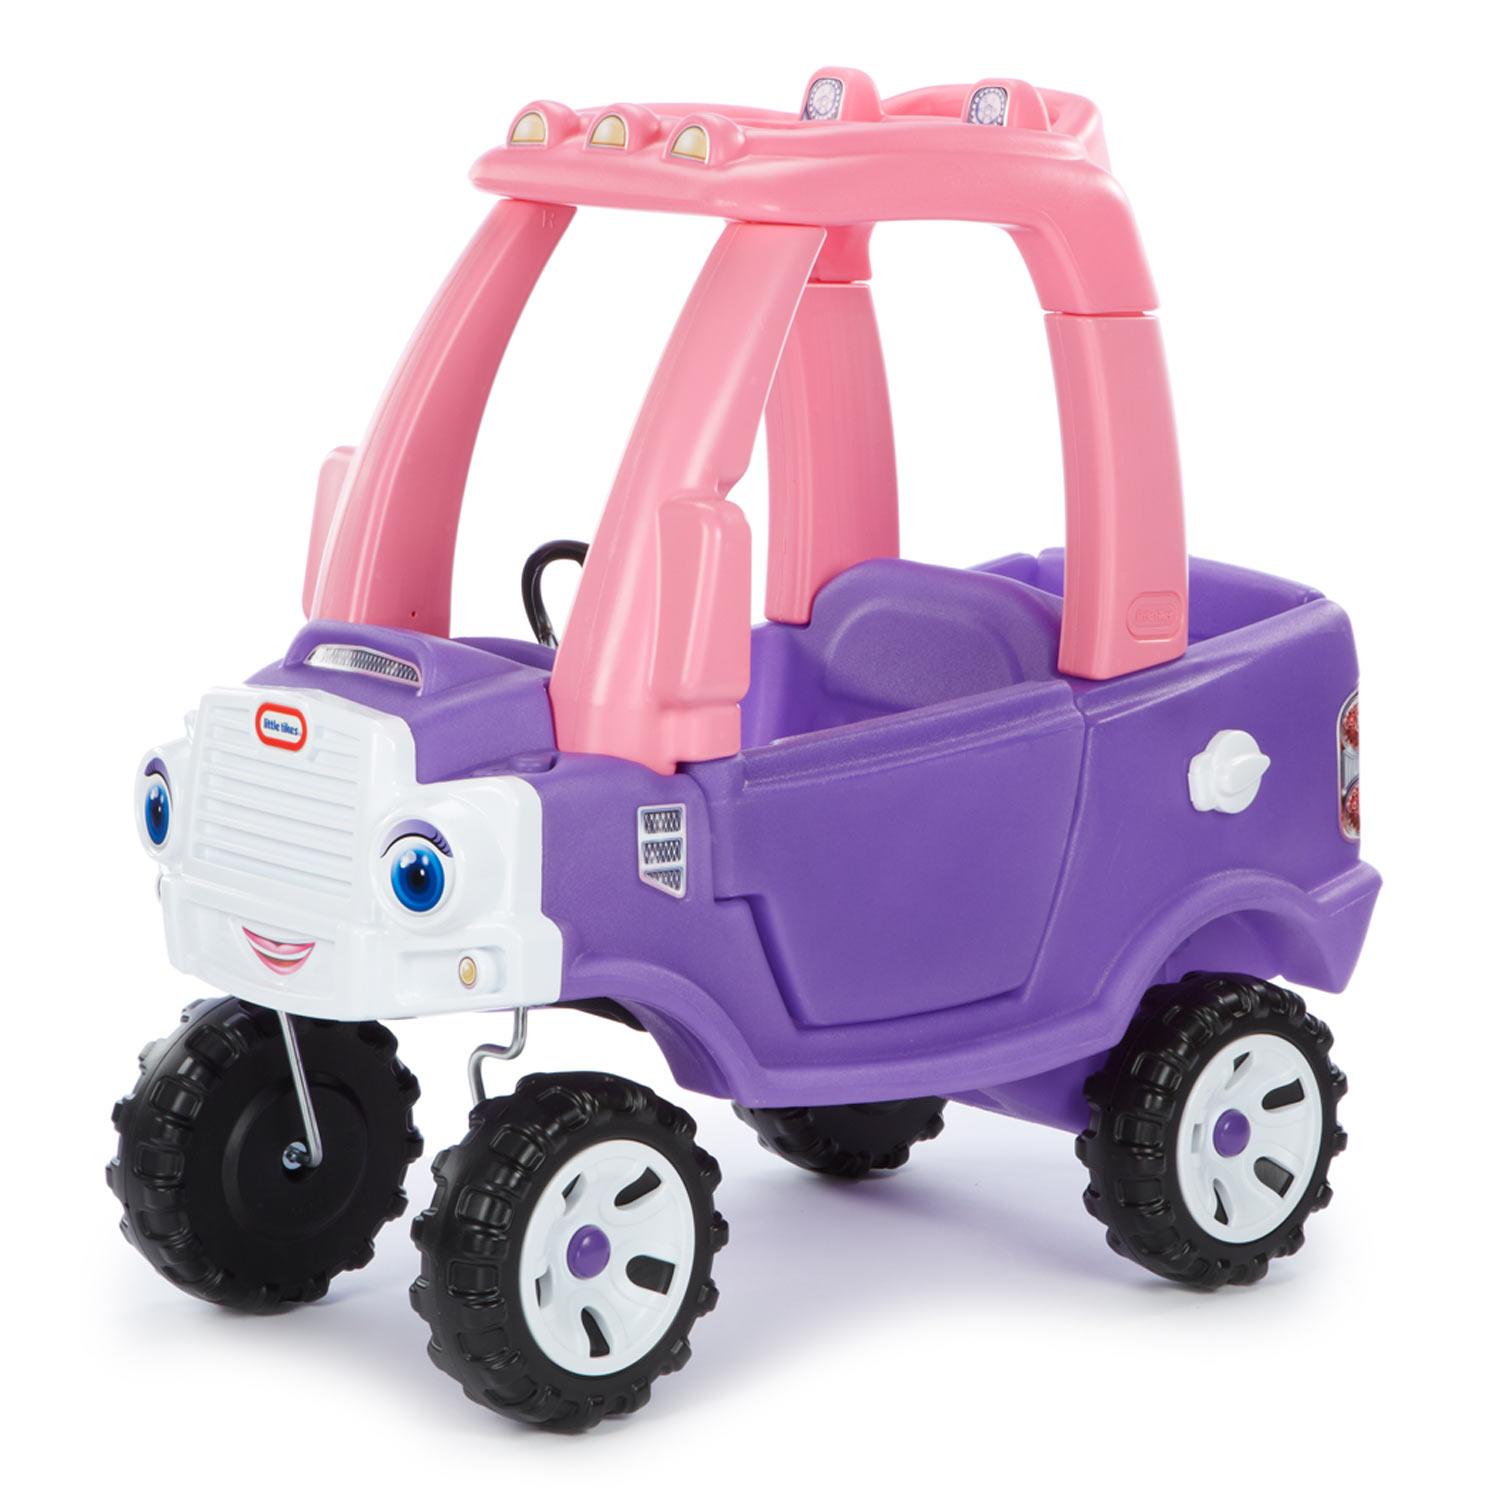 little tikes rosy cosy coupe